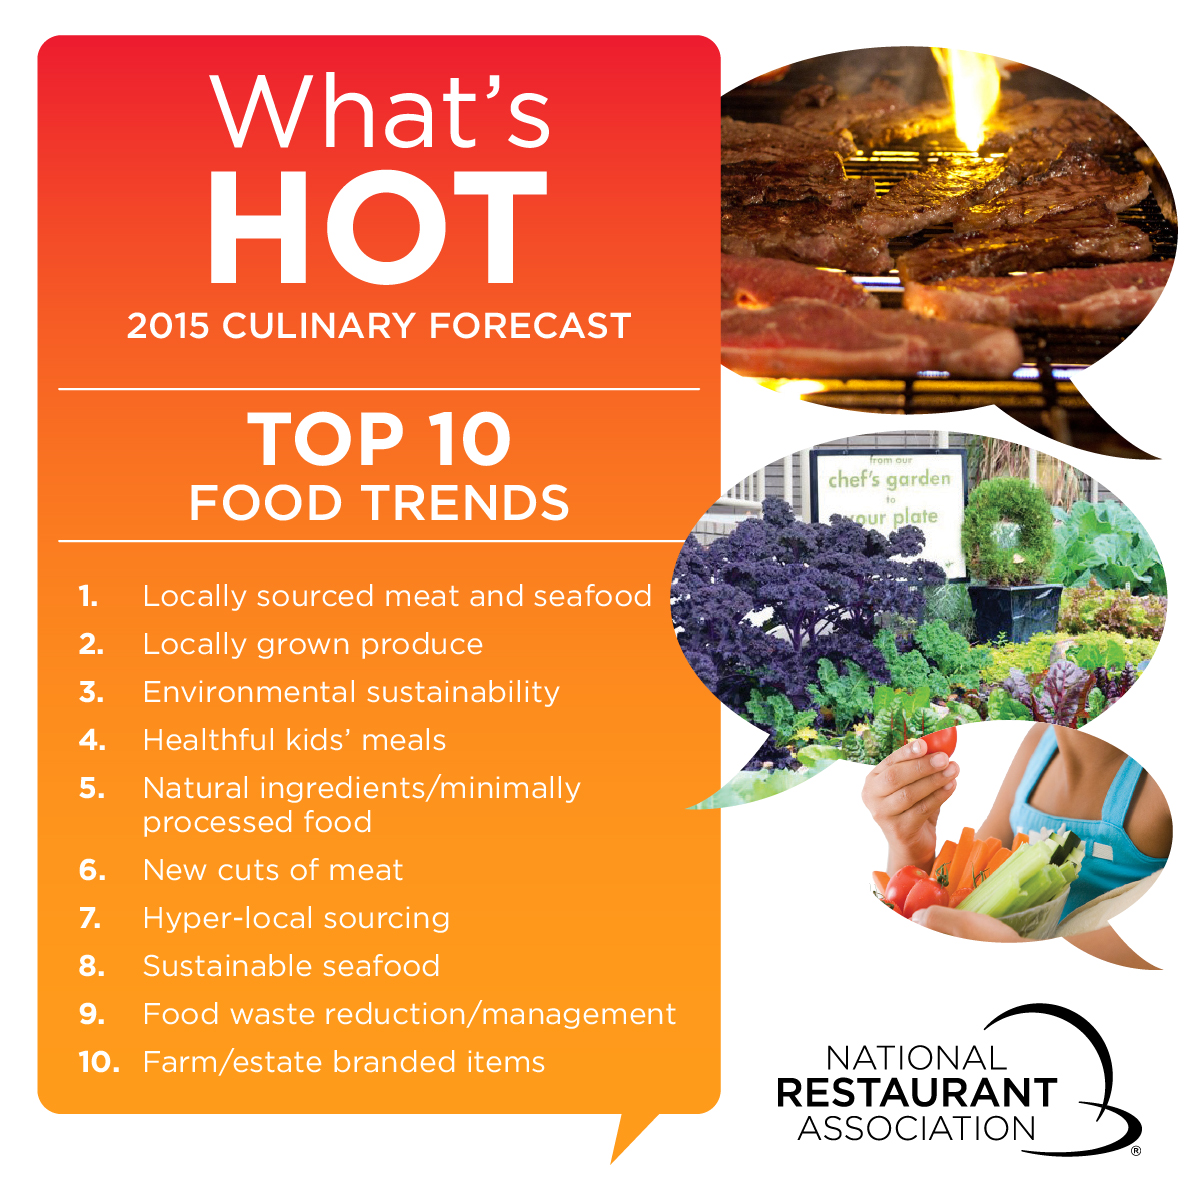 The National Restaurant Association's Top 10 Food Trends for 2015